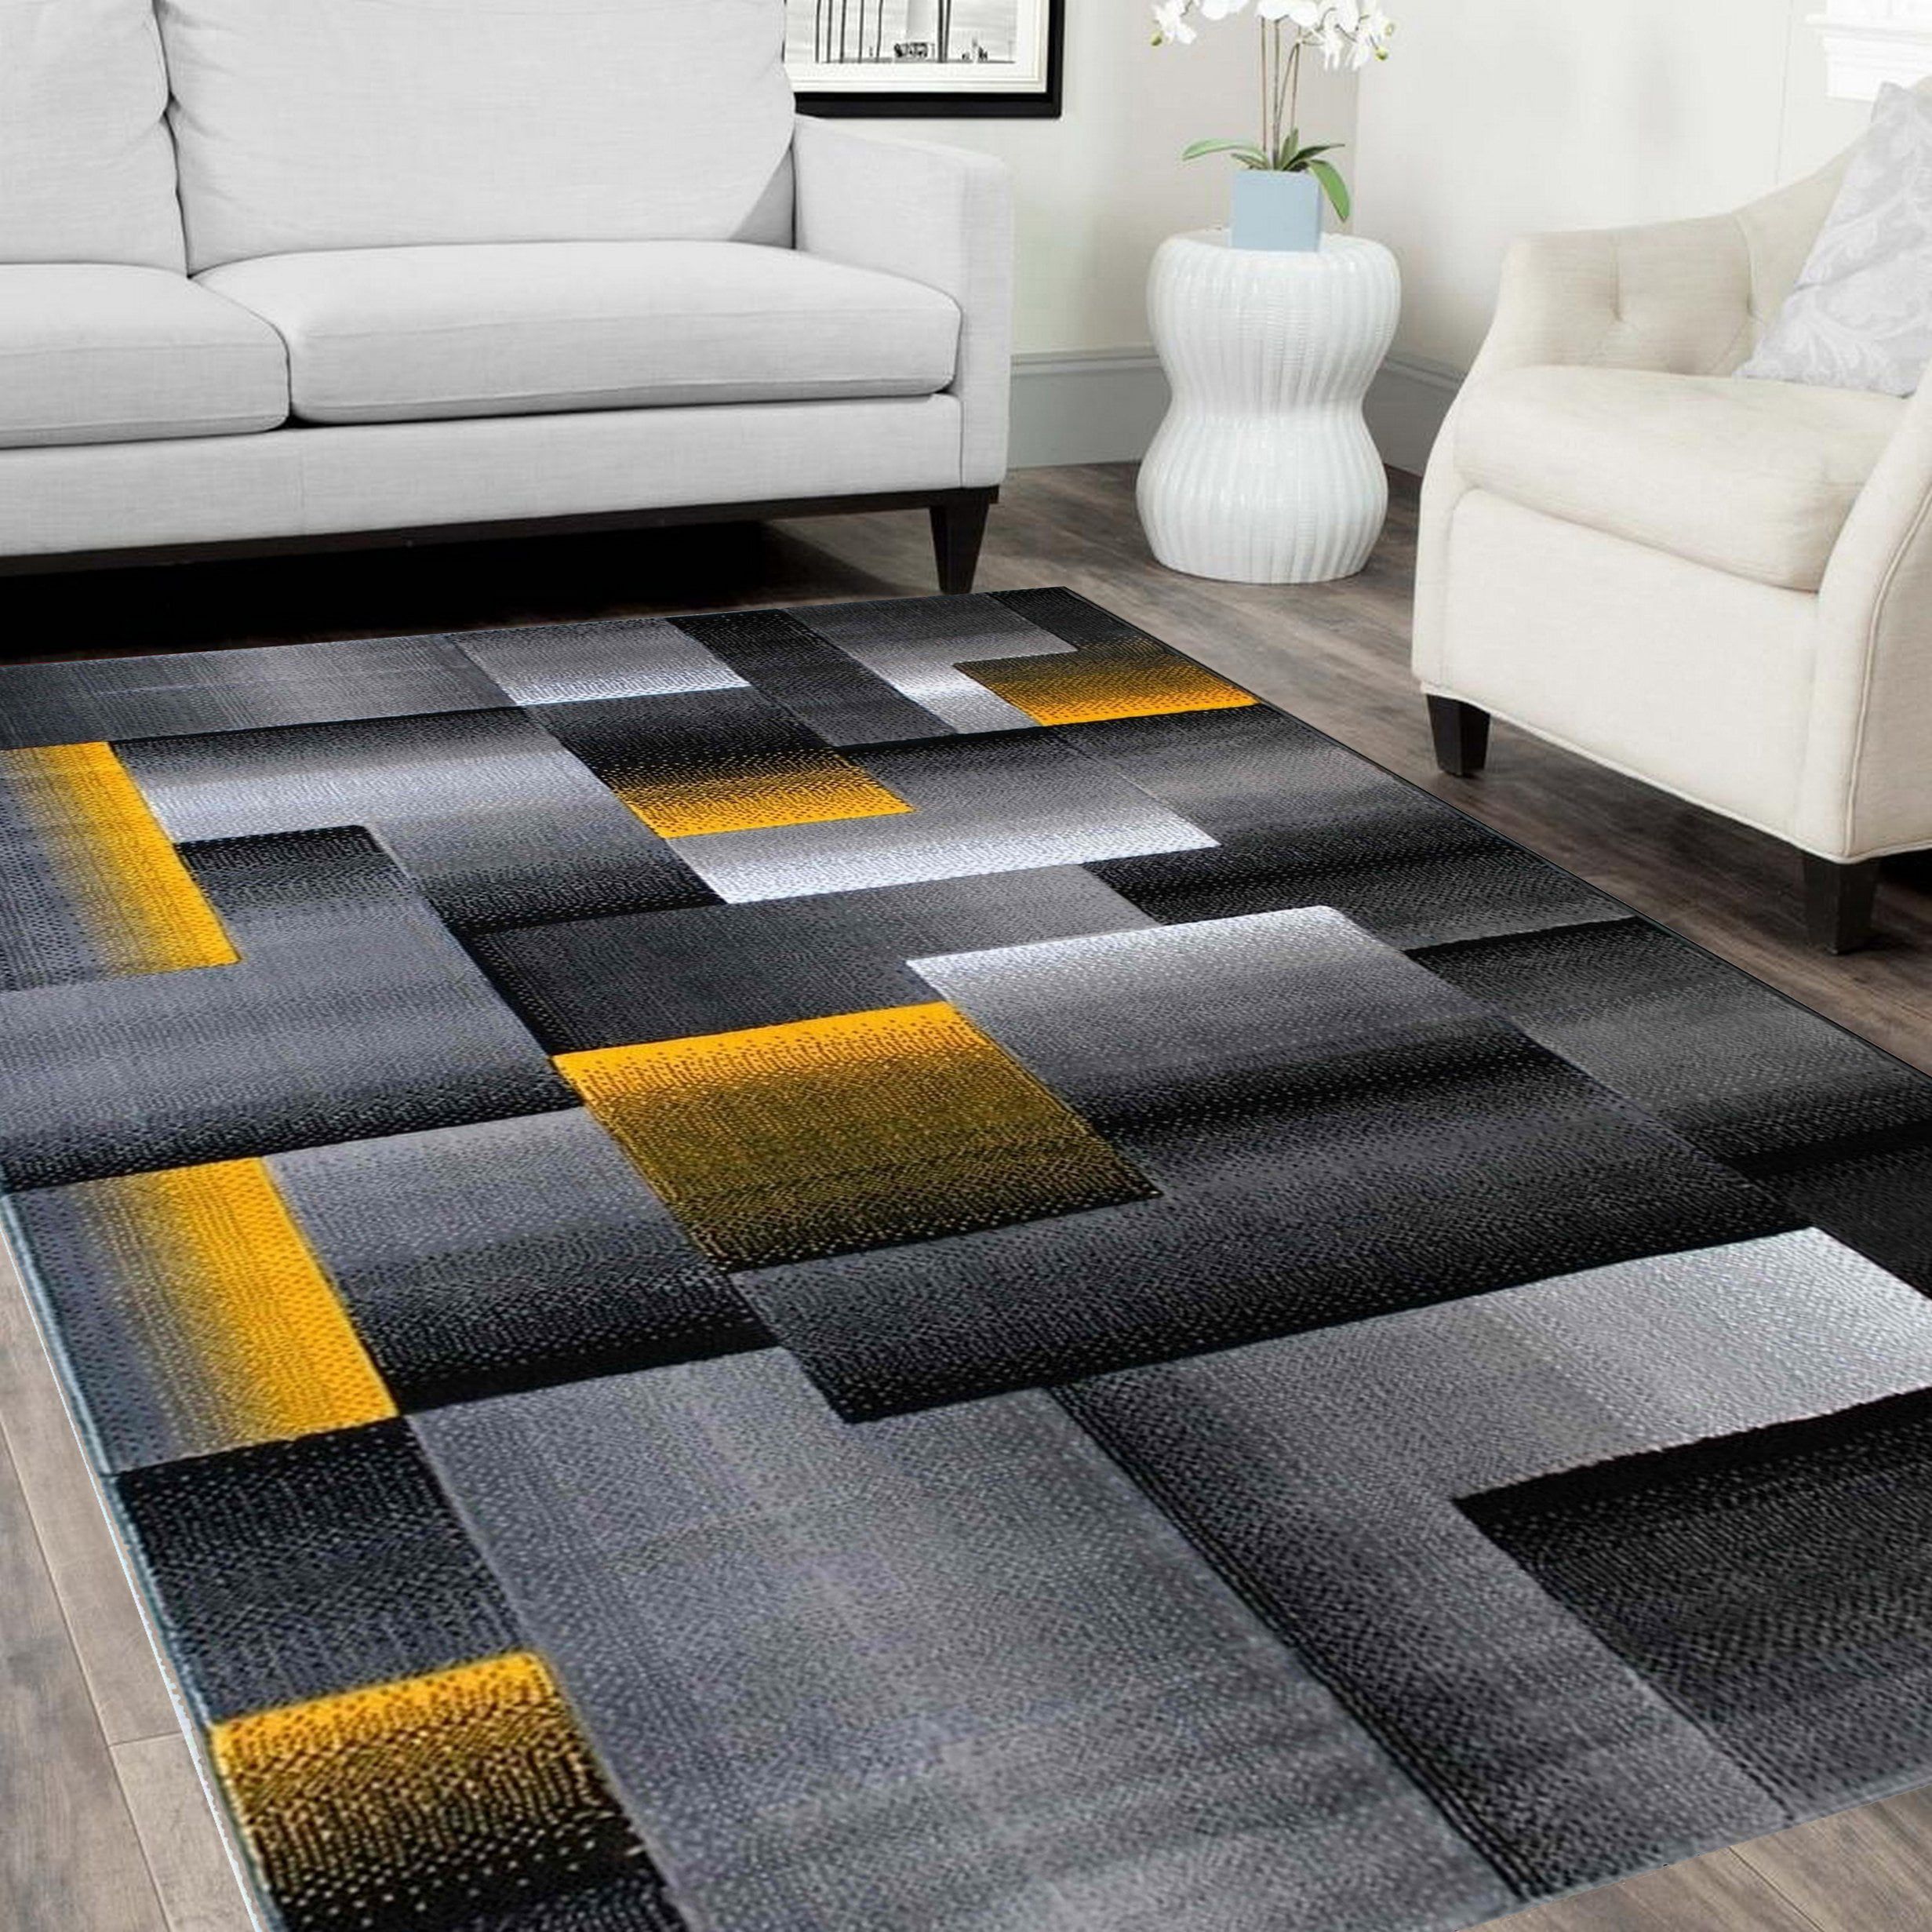 Yellow/Grey/Silver/Black/Abstract Area Rug Modern Contemporary Geometric  Cube And Square Design Pattern Carpet – Walmart Pertaining To Modern Square Rugs (View 8 of 15)